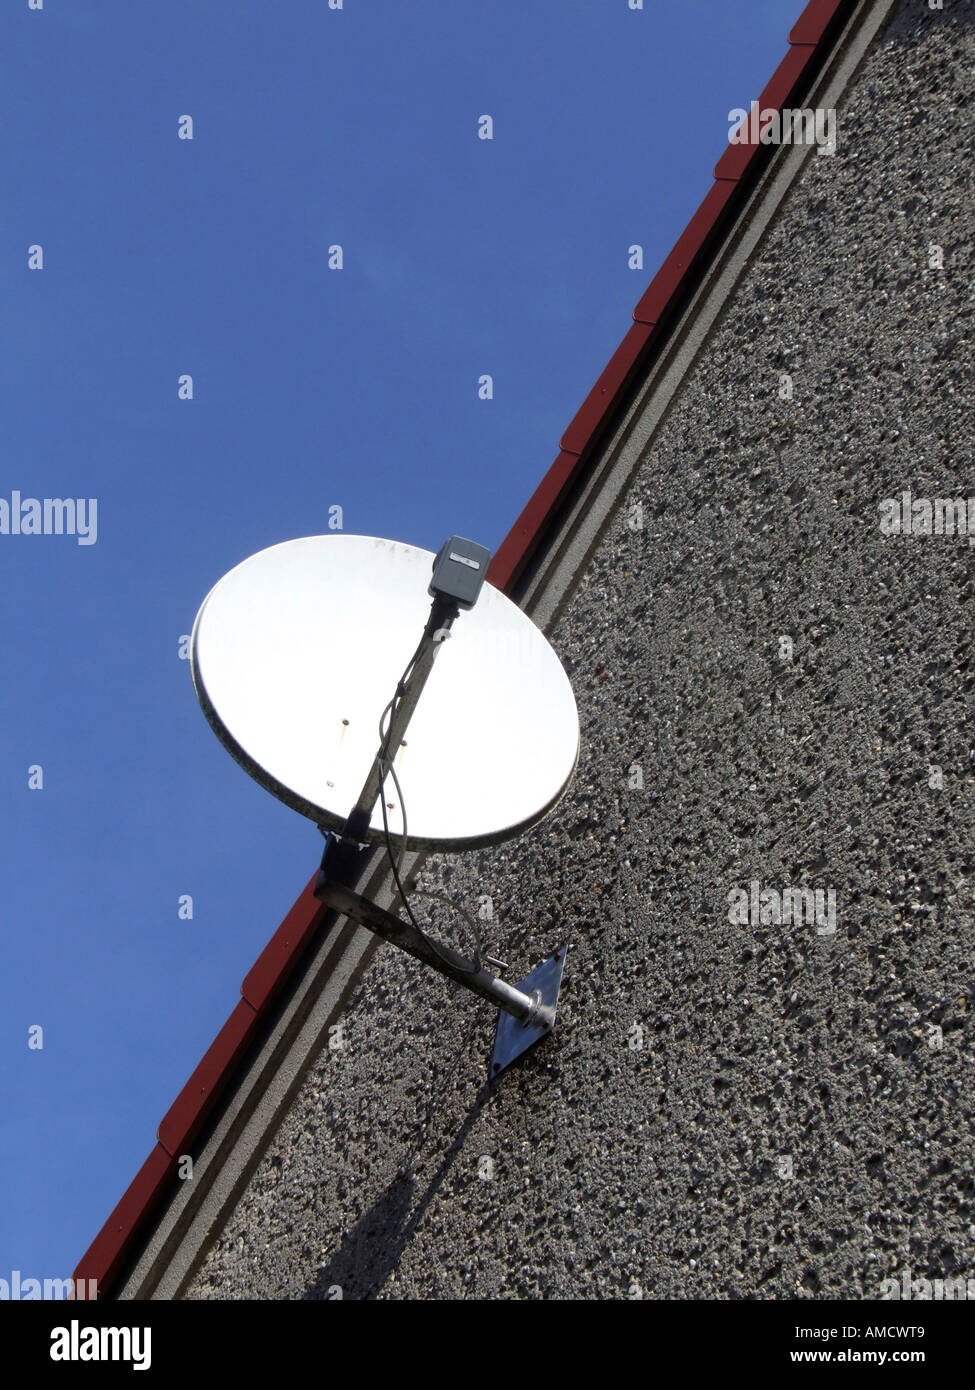 Satellite dish on roof low angle view Stock Photo